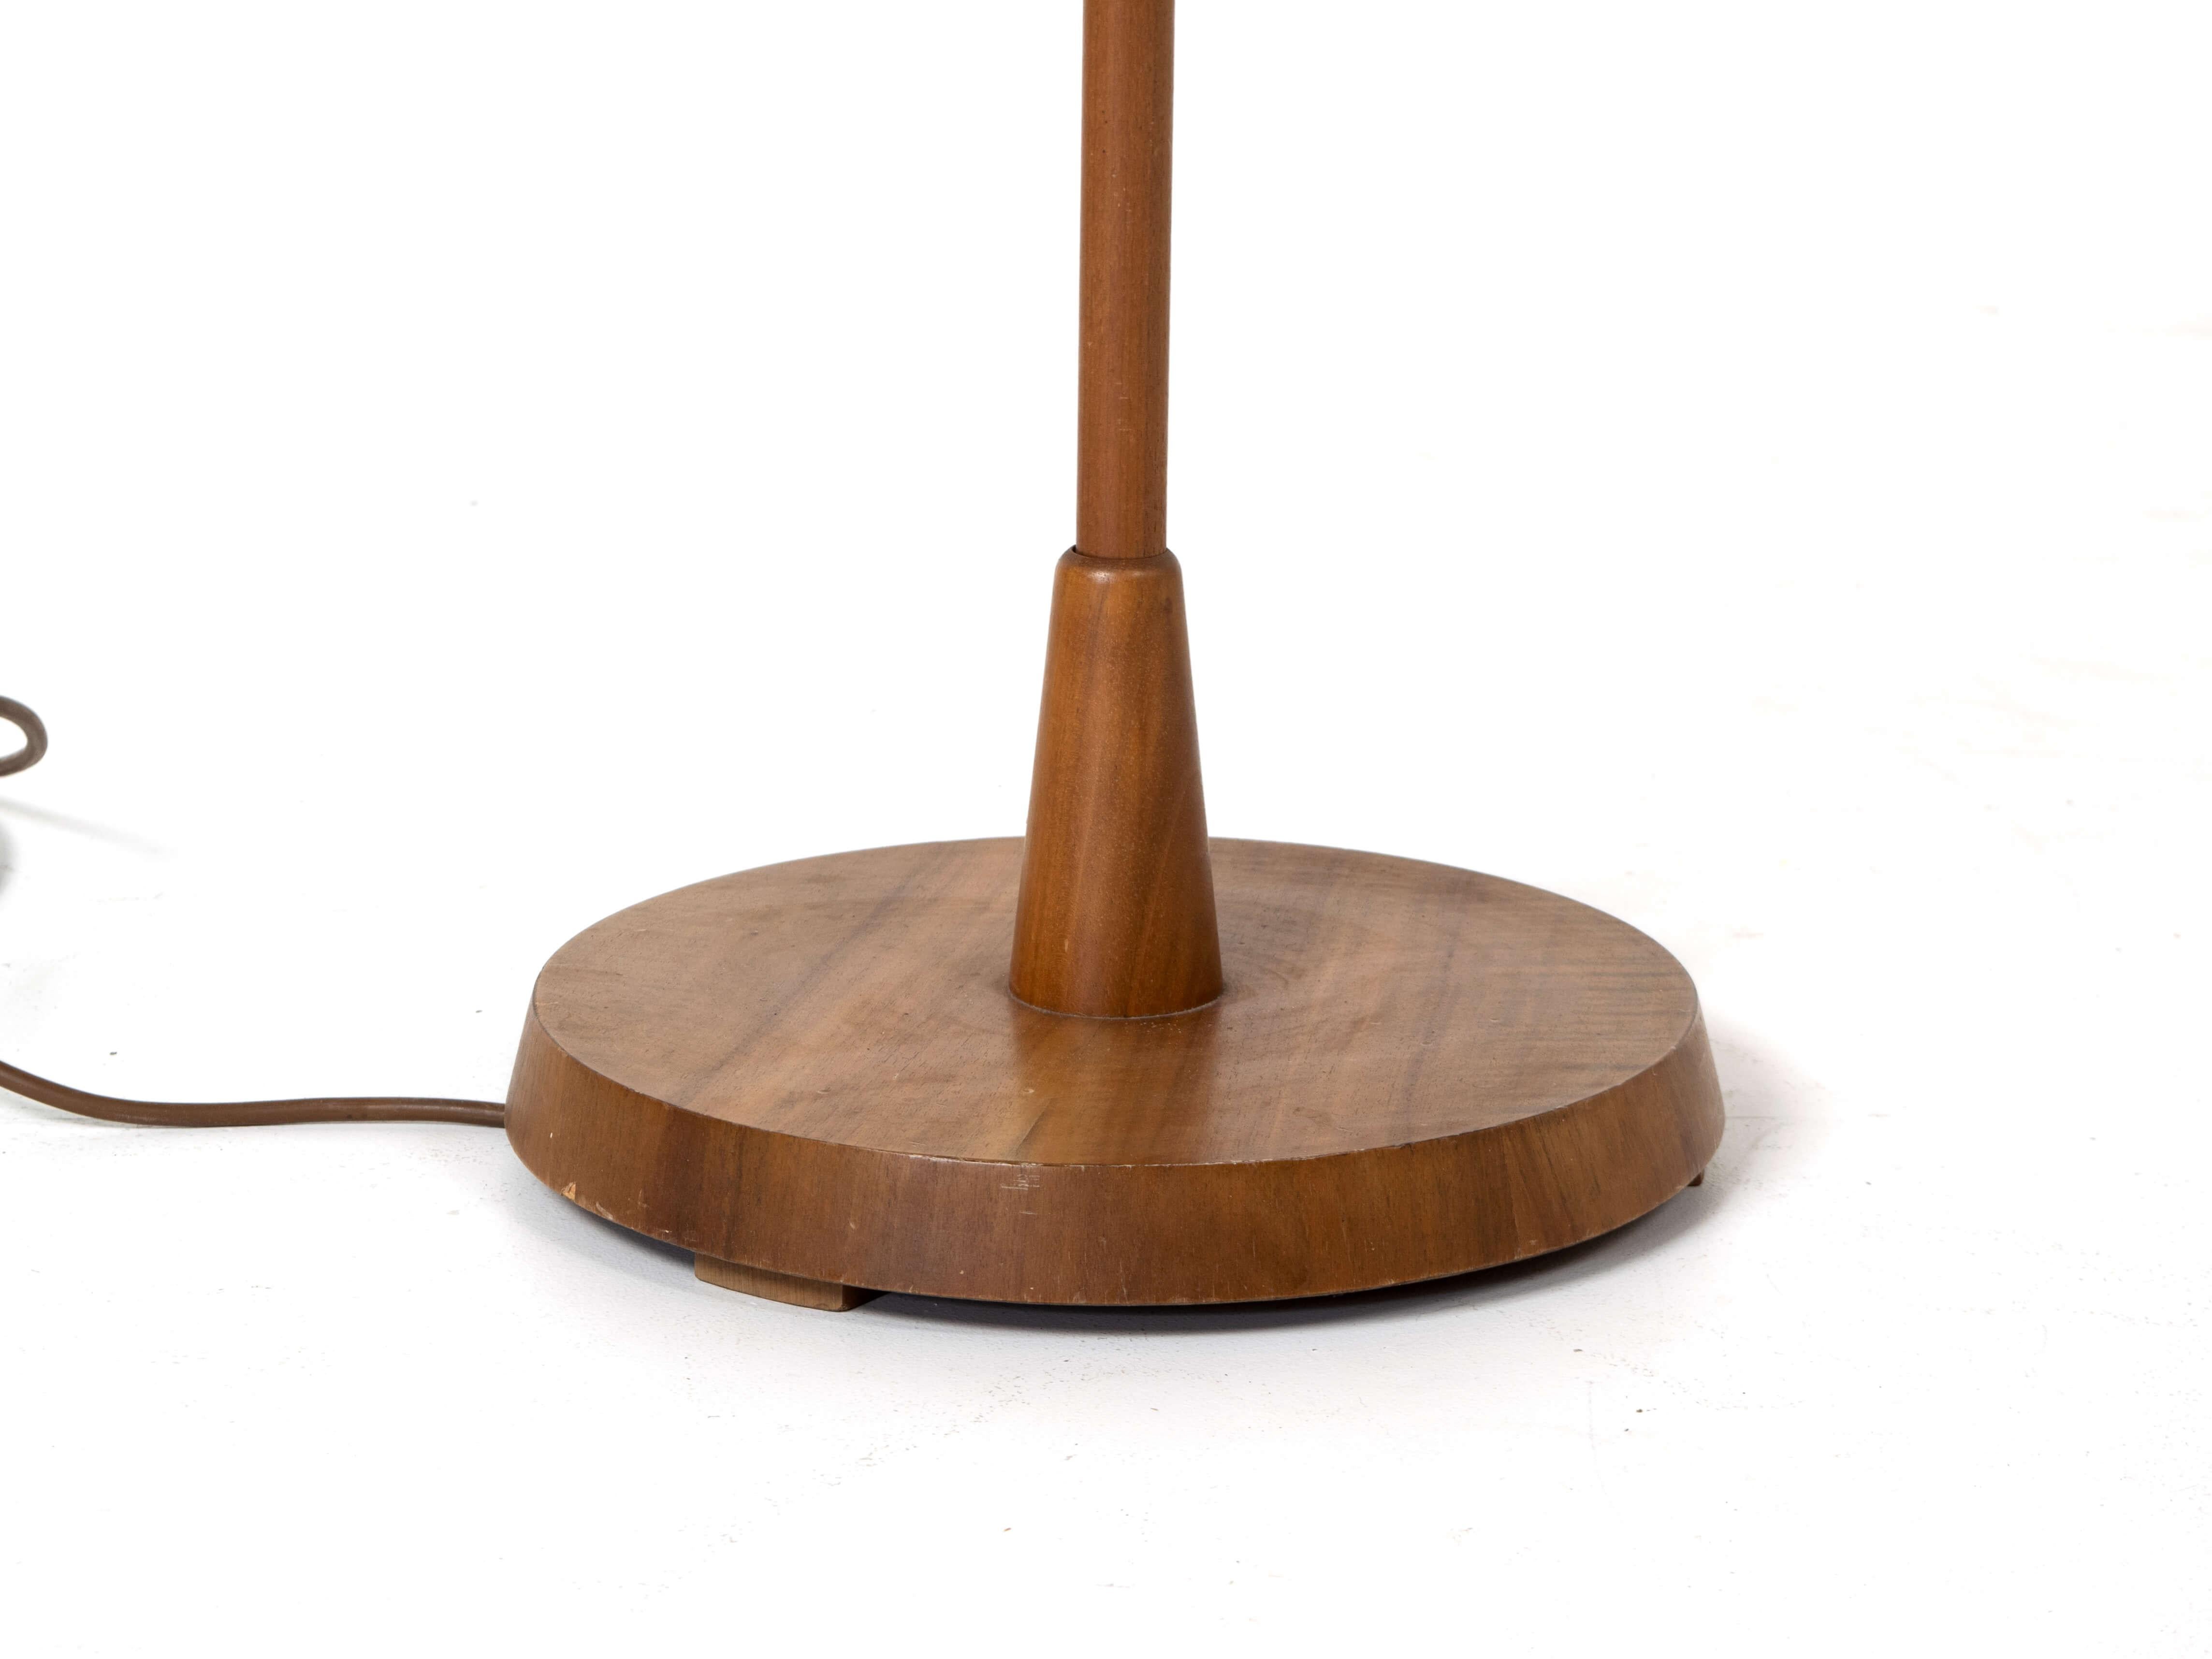 Temde Floor Lamp in Teak and Fabric, Germany, 1970s For Sale 3